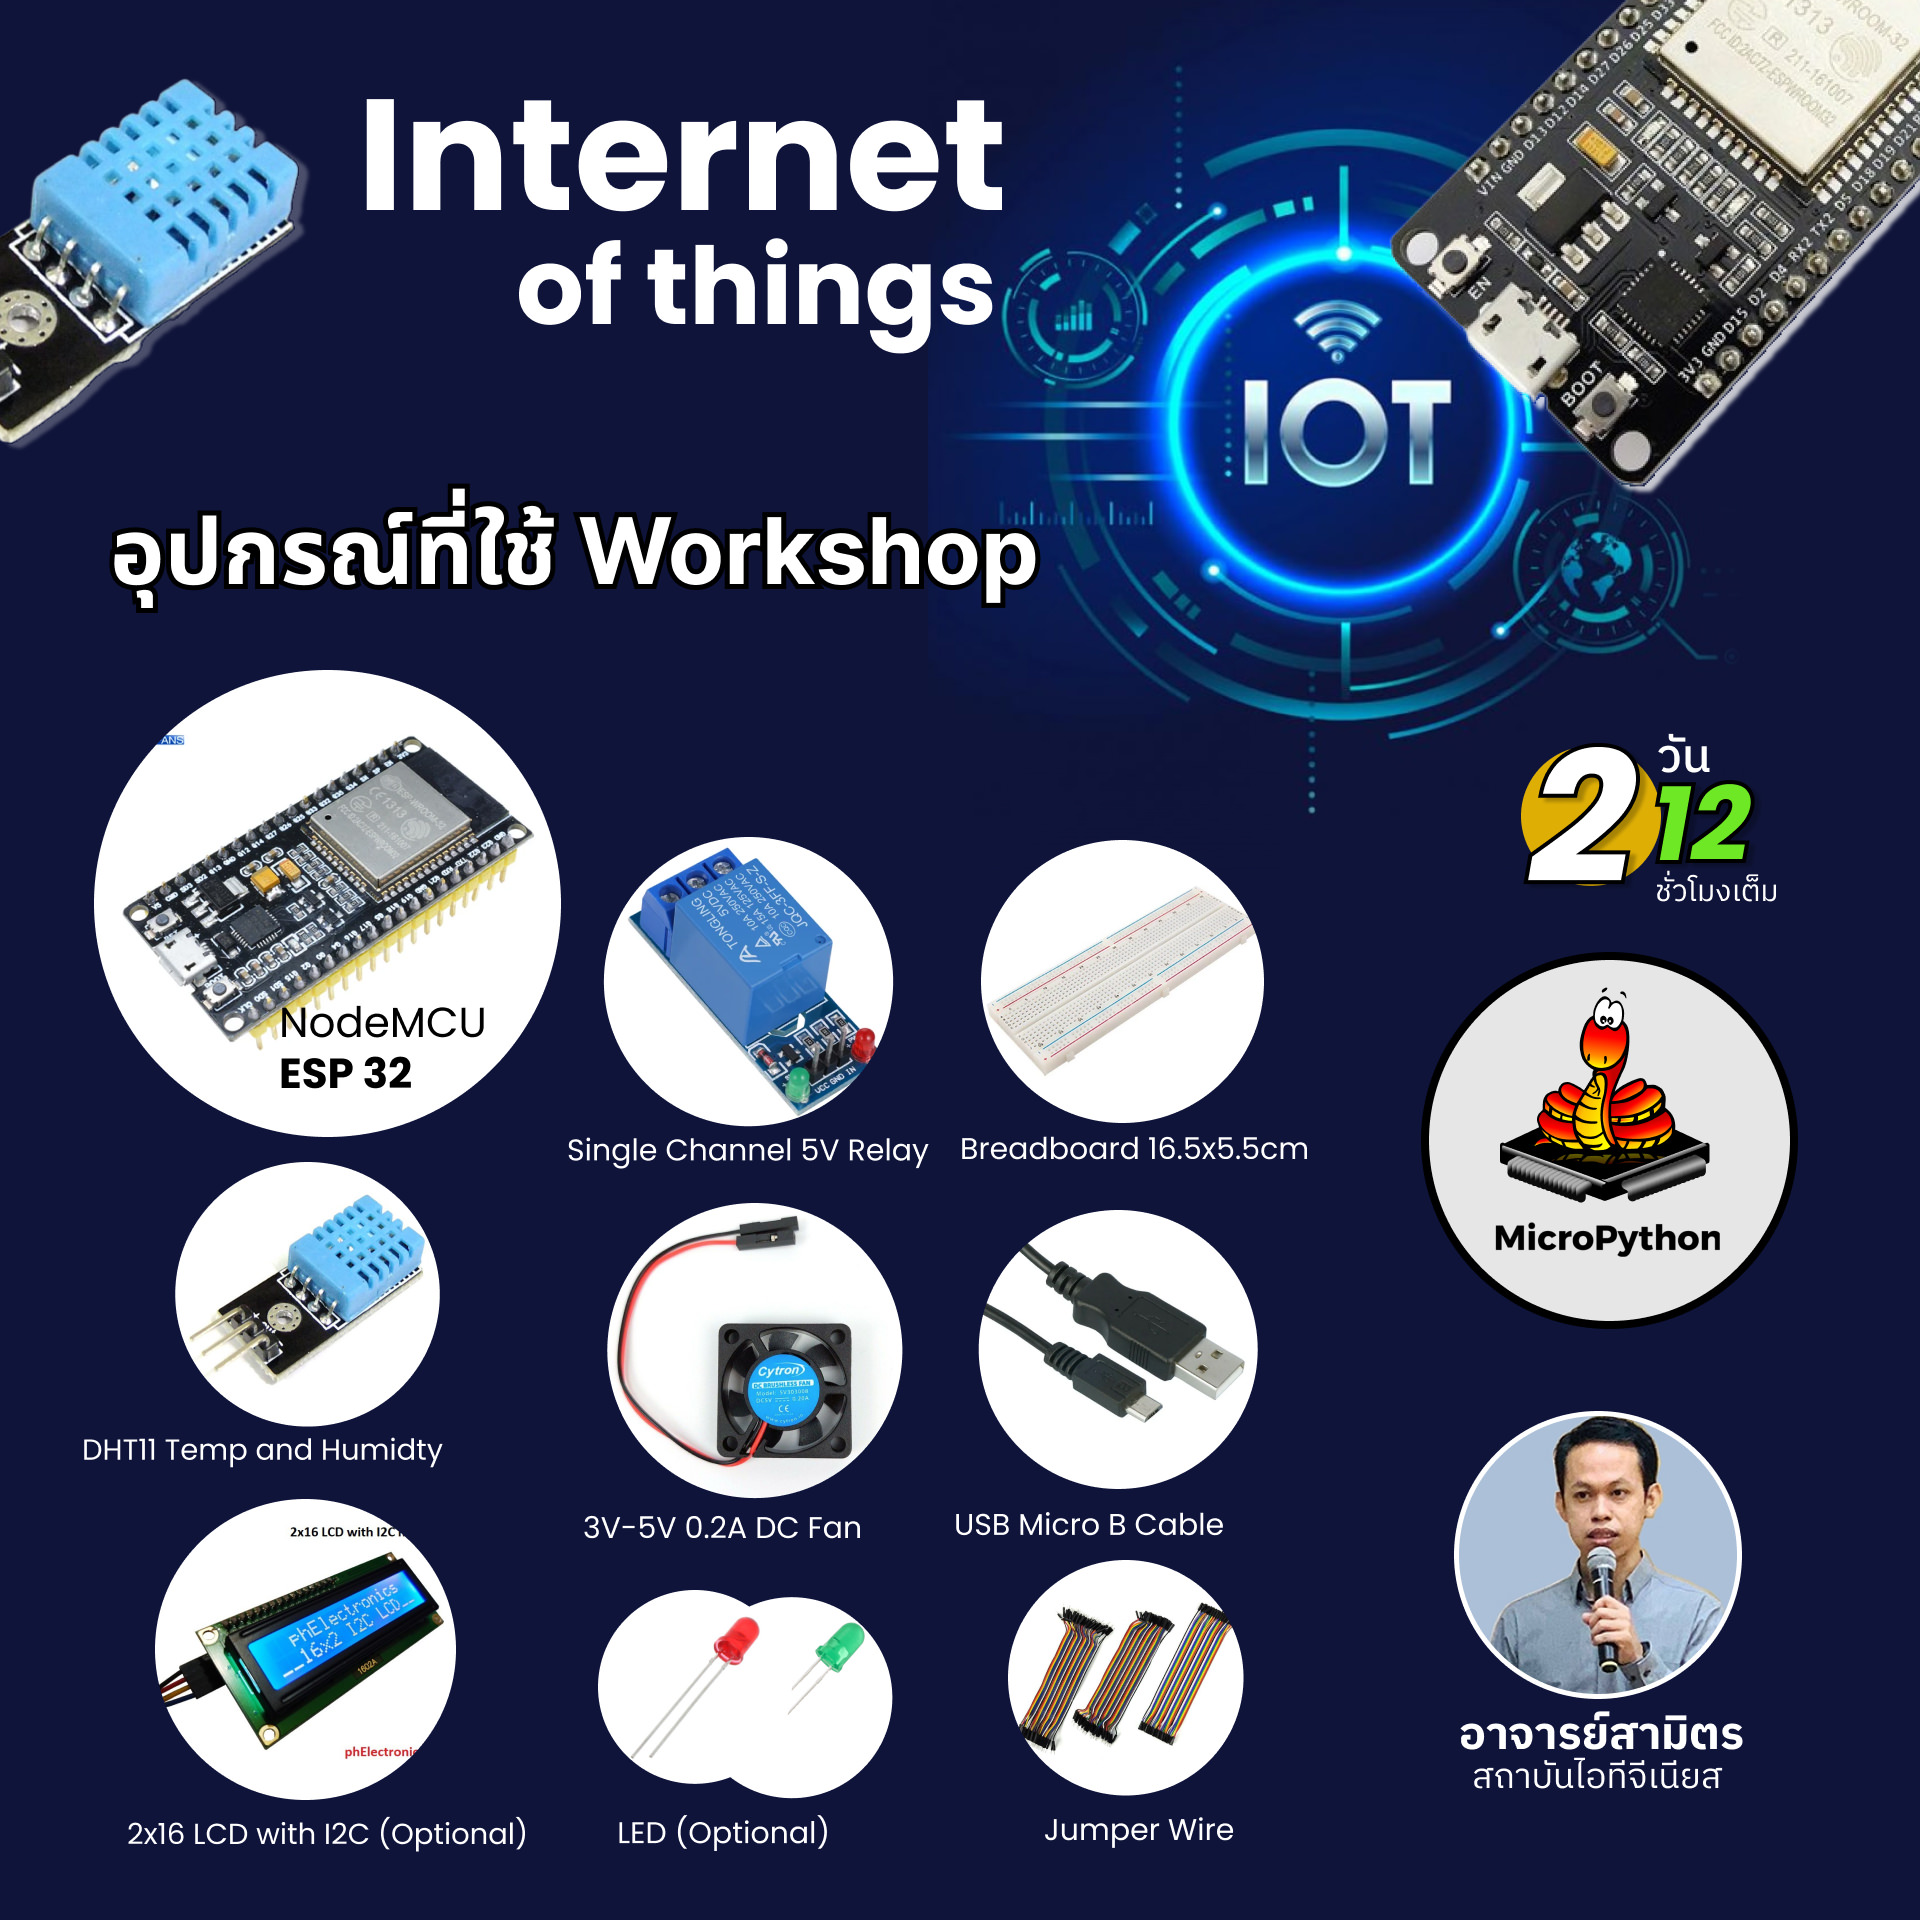 Internet of Things with MicroPython